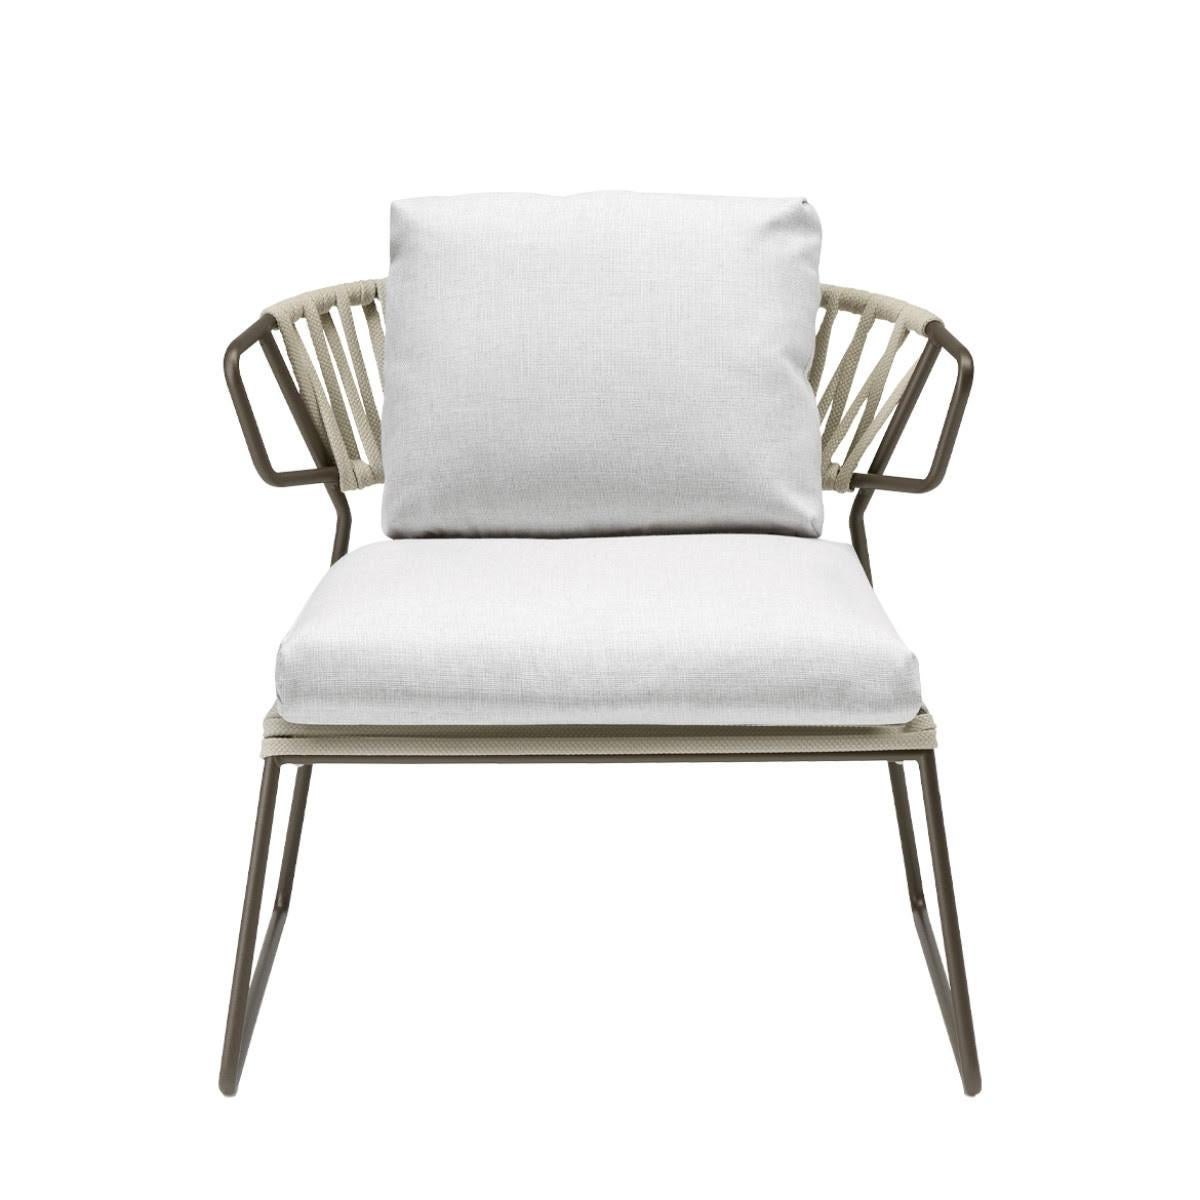 Contemporary Modern Grey Armchair Outdoor or Indoor in Metal and Ropes, 21 century For Sale